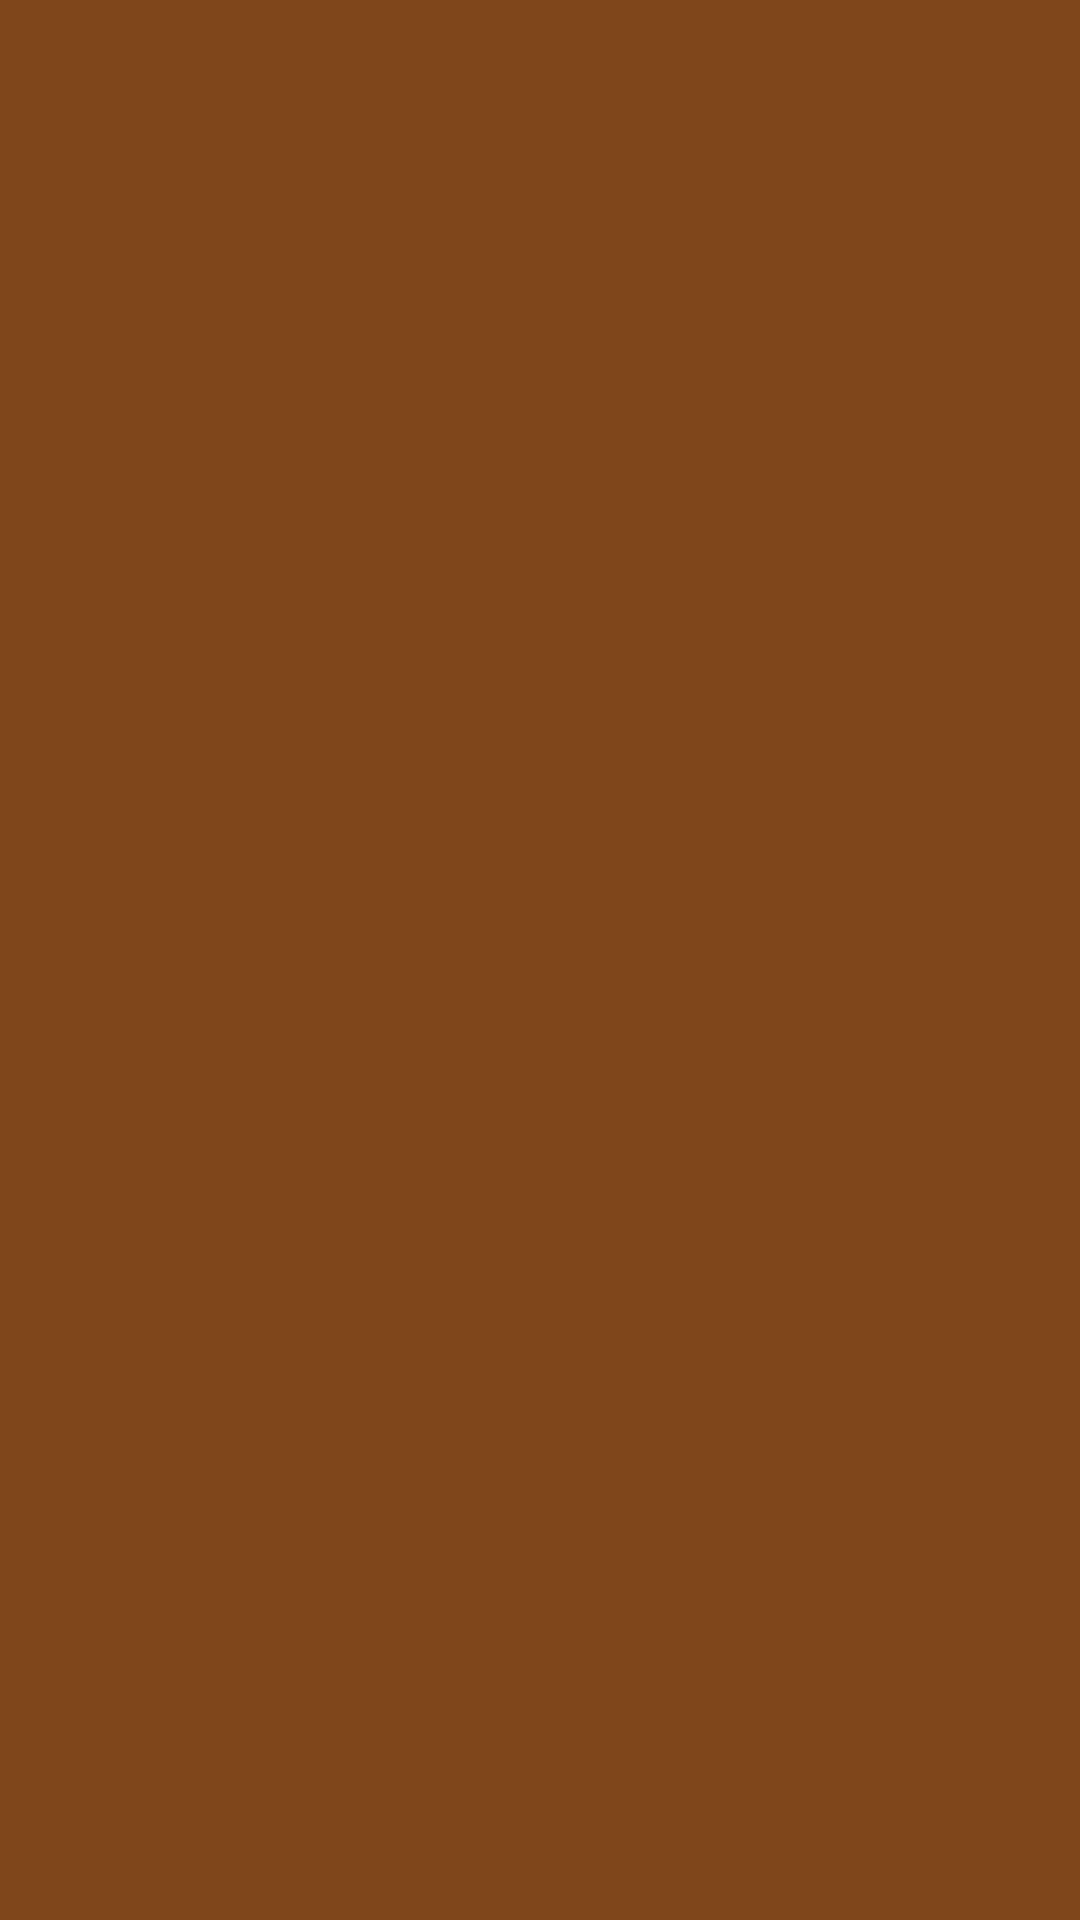 1080x1920 Russet Solid Color Background